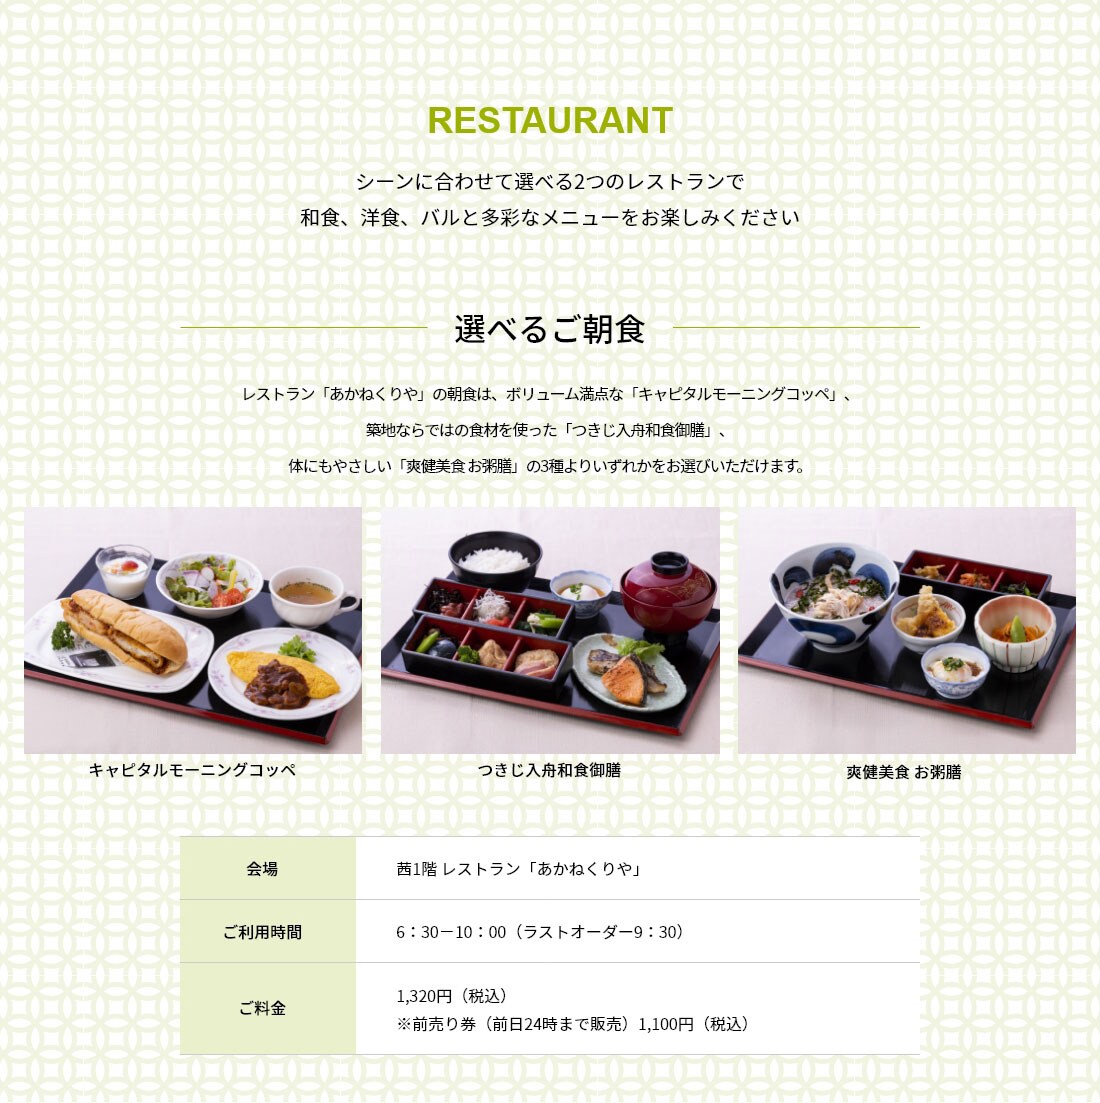 Hotel information and reservations for Ginza Capital Hotel Moegi